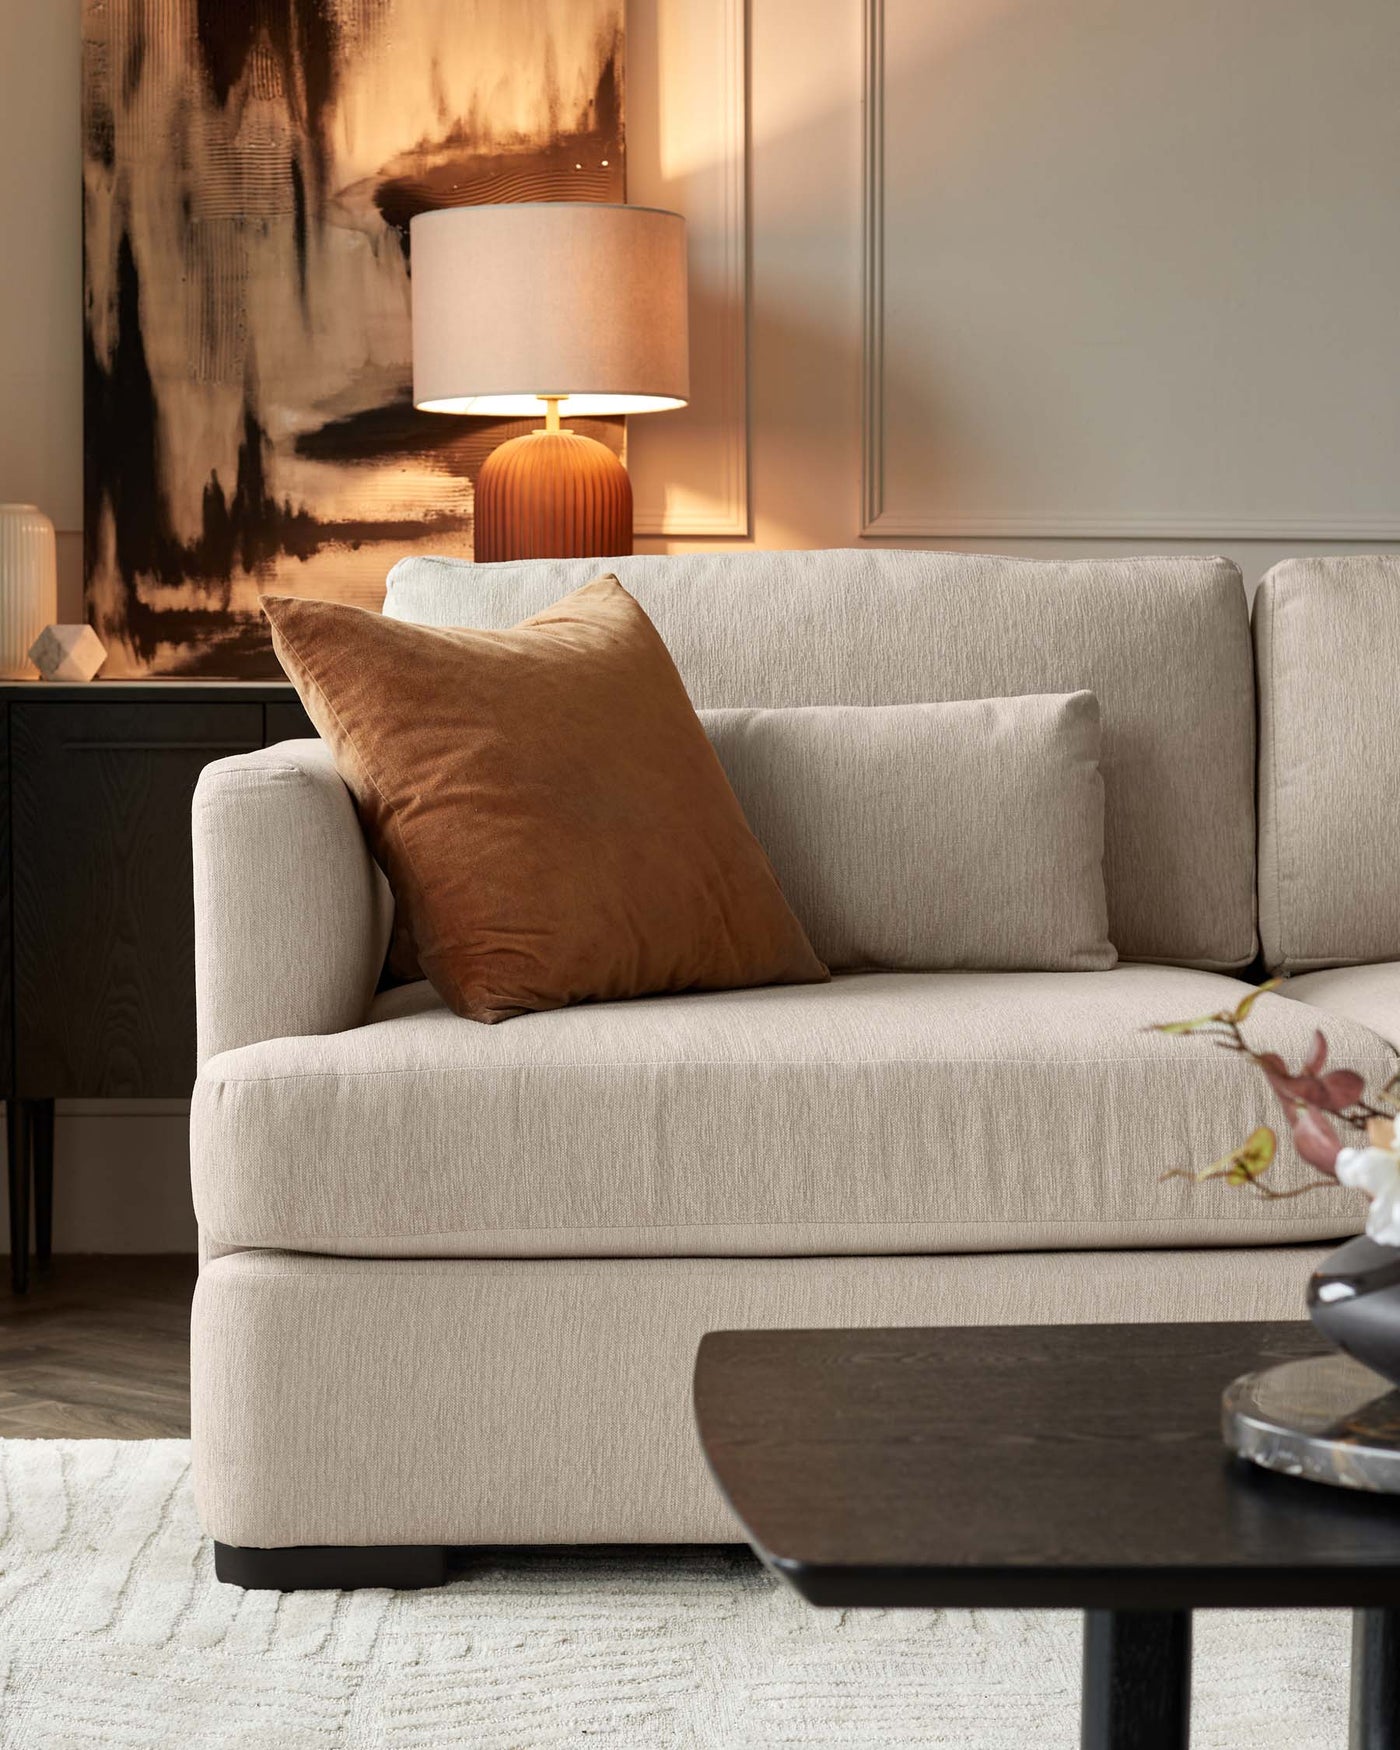 A contemporary beige upholstered sofa with plush back cushions and a singular seat cushion, flanked by a dark wood side table with a ribbed texture base and a lamp with a warm-toned shade on top. In the foreground, a dark-stained, elliptical-shaped coffee table is partially visible, and a textured off-white area rug lies underneath. Decorative accents include neutral-toned pillows and an abstract painting in warm browns and blacks.